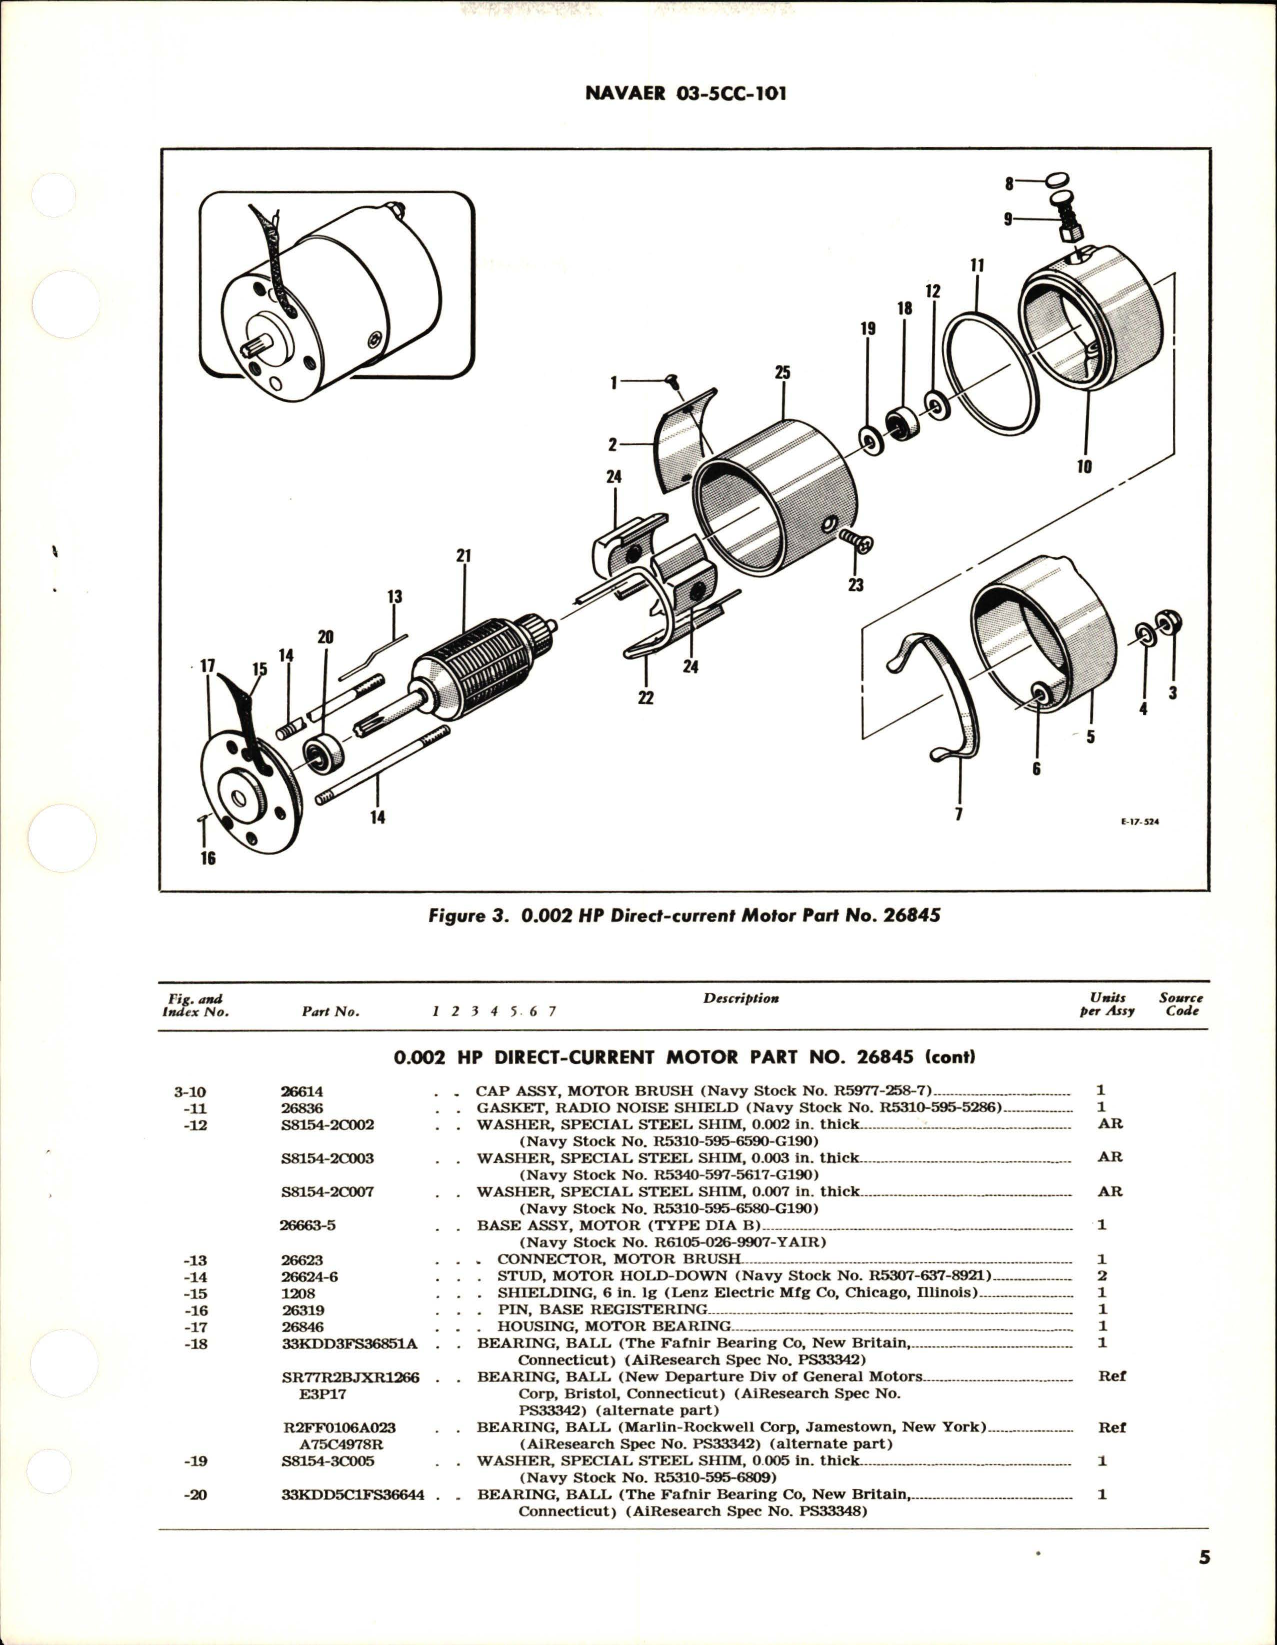 Sample page 5 from AirCorps Library document: Overhaul Instructions with Parts Breakdown for Direct Current Motor - 0.002 HP - Part 26845